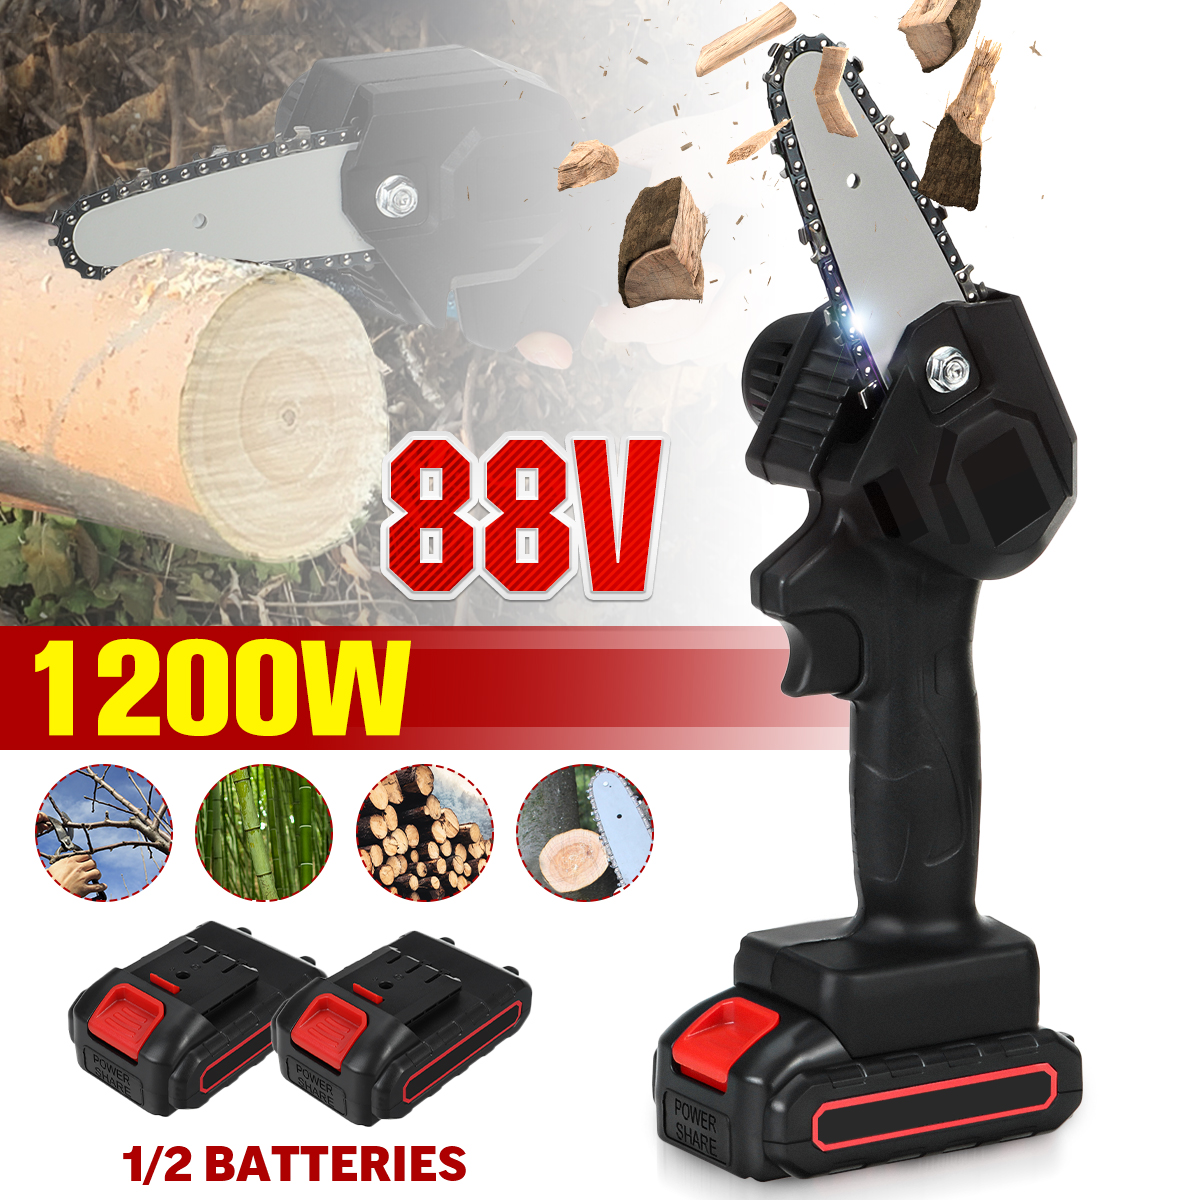 24V-1200W-4Inch-One-Hand-Saw-Electric-Chain-Saw-Woodworking-Wood-Cutter-W-012pcs-Battery-1806769-1